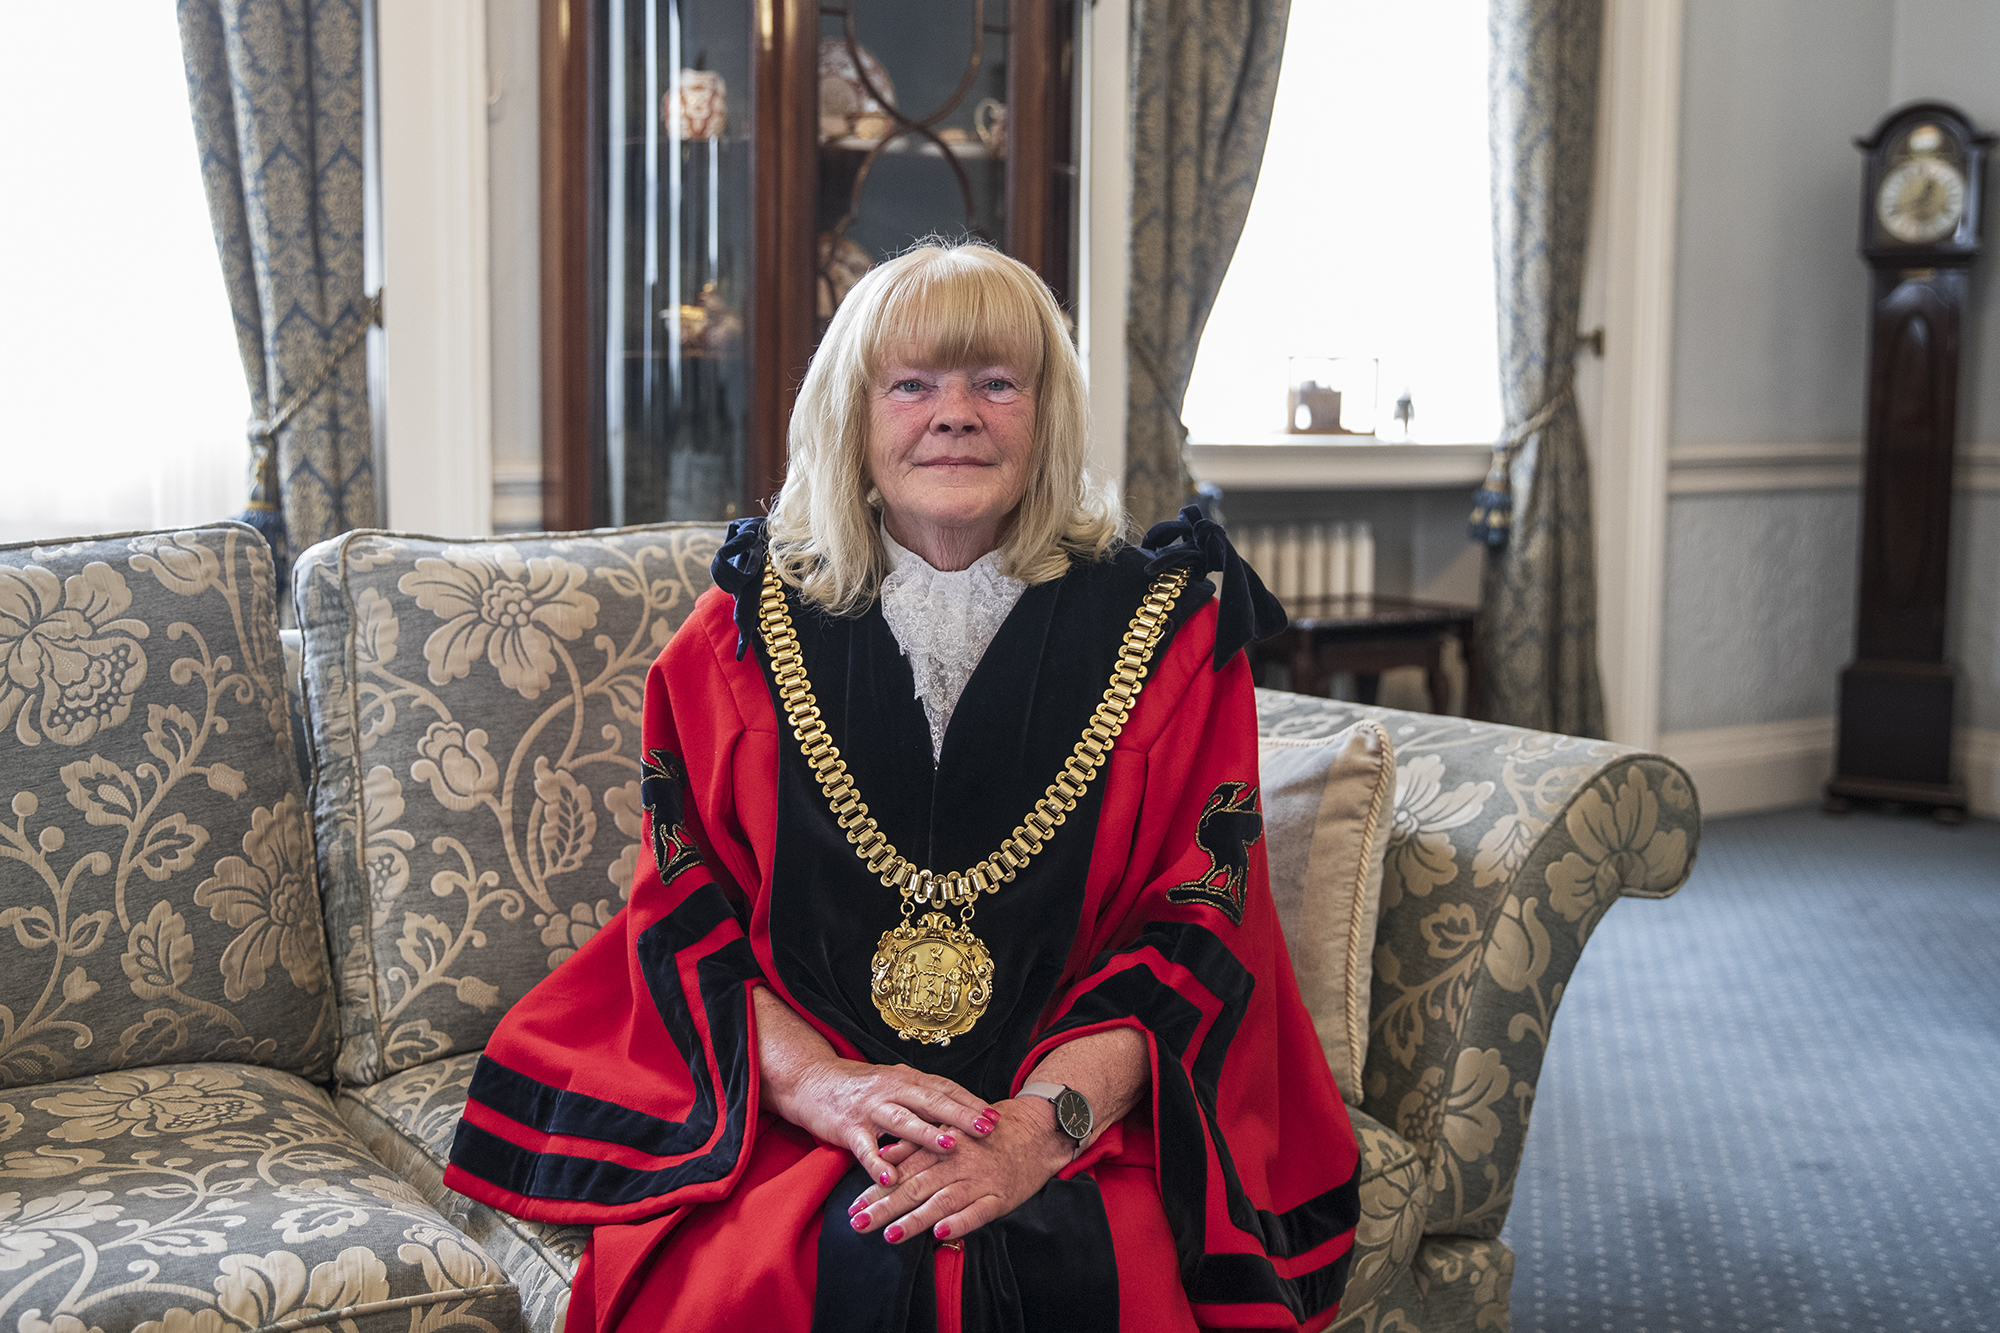 lord mayor mary rasmussen sittin gon a couch in mayoral robes in front of open curtains on a closed window